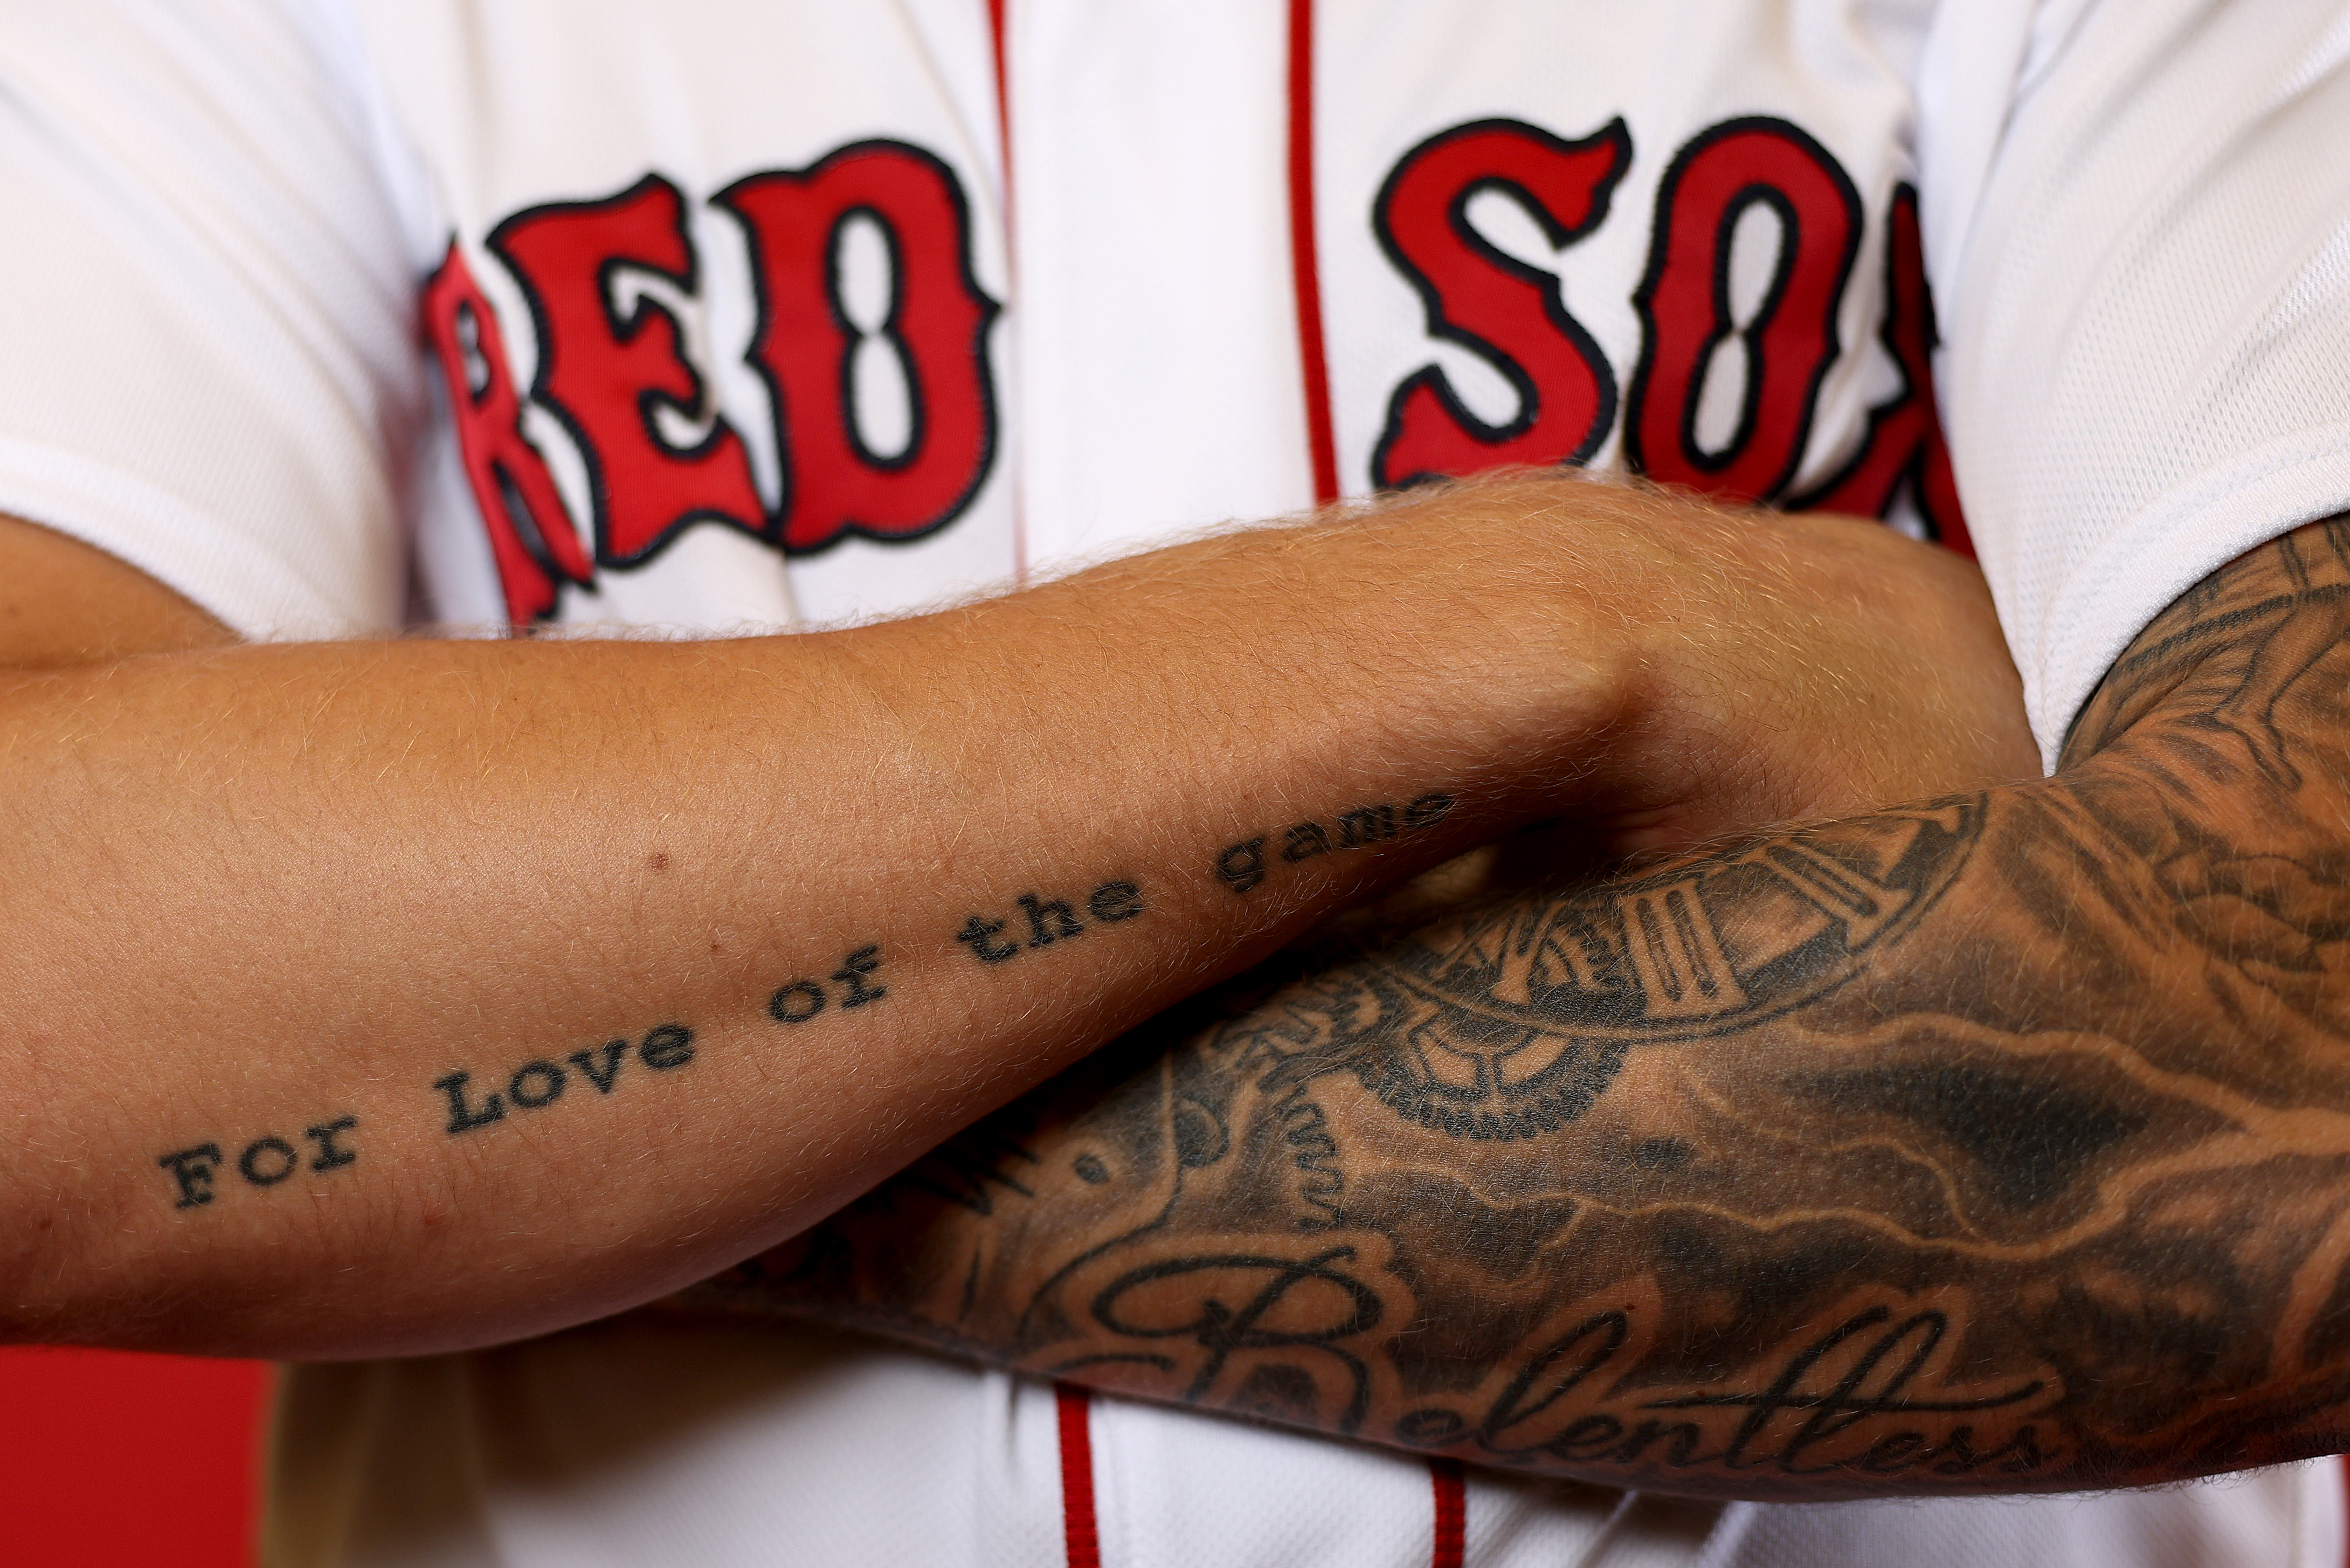 Alex Verdugo Tells the Story Behind His Tattoos, The story behind the  tats. Alex Verdugo takes you beneath the ink., By Boston Red Sox